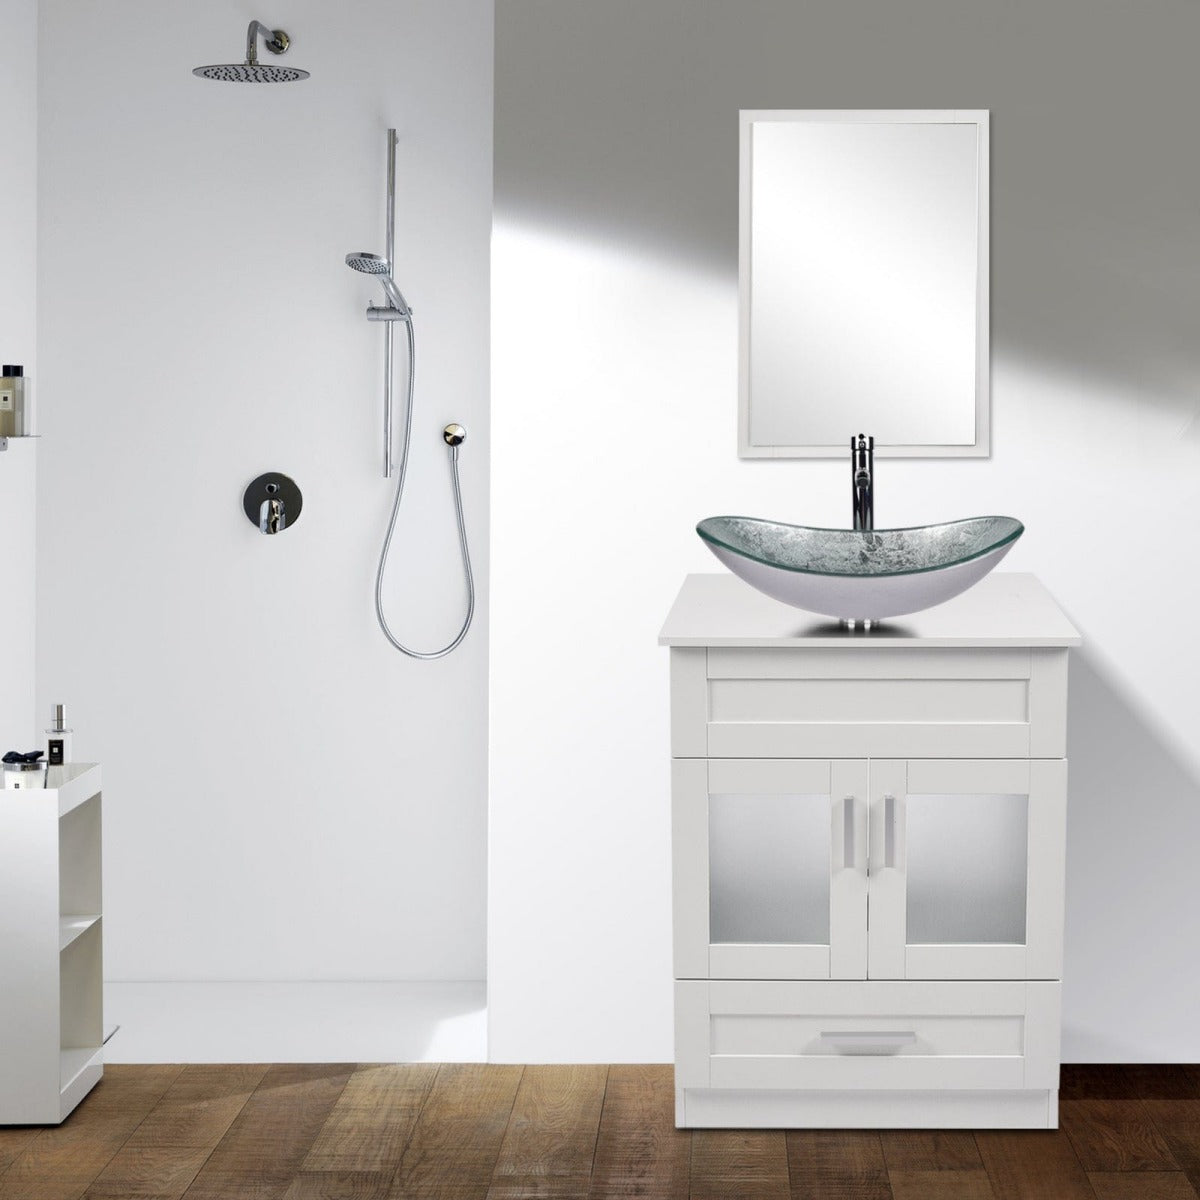 Elecwish White Bathroom Vanity with Silver Boat Sink Set BA1001-WH displays in the bathroom